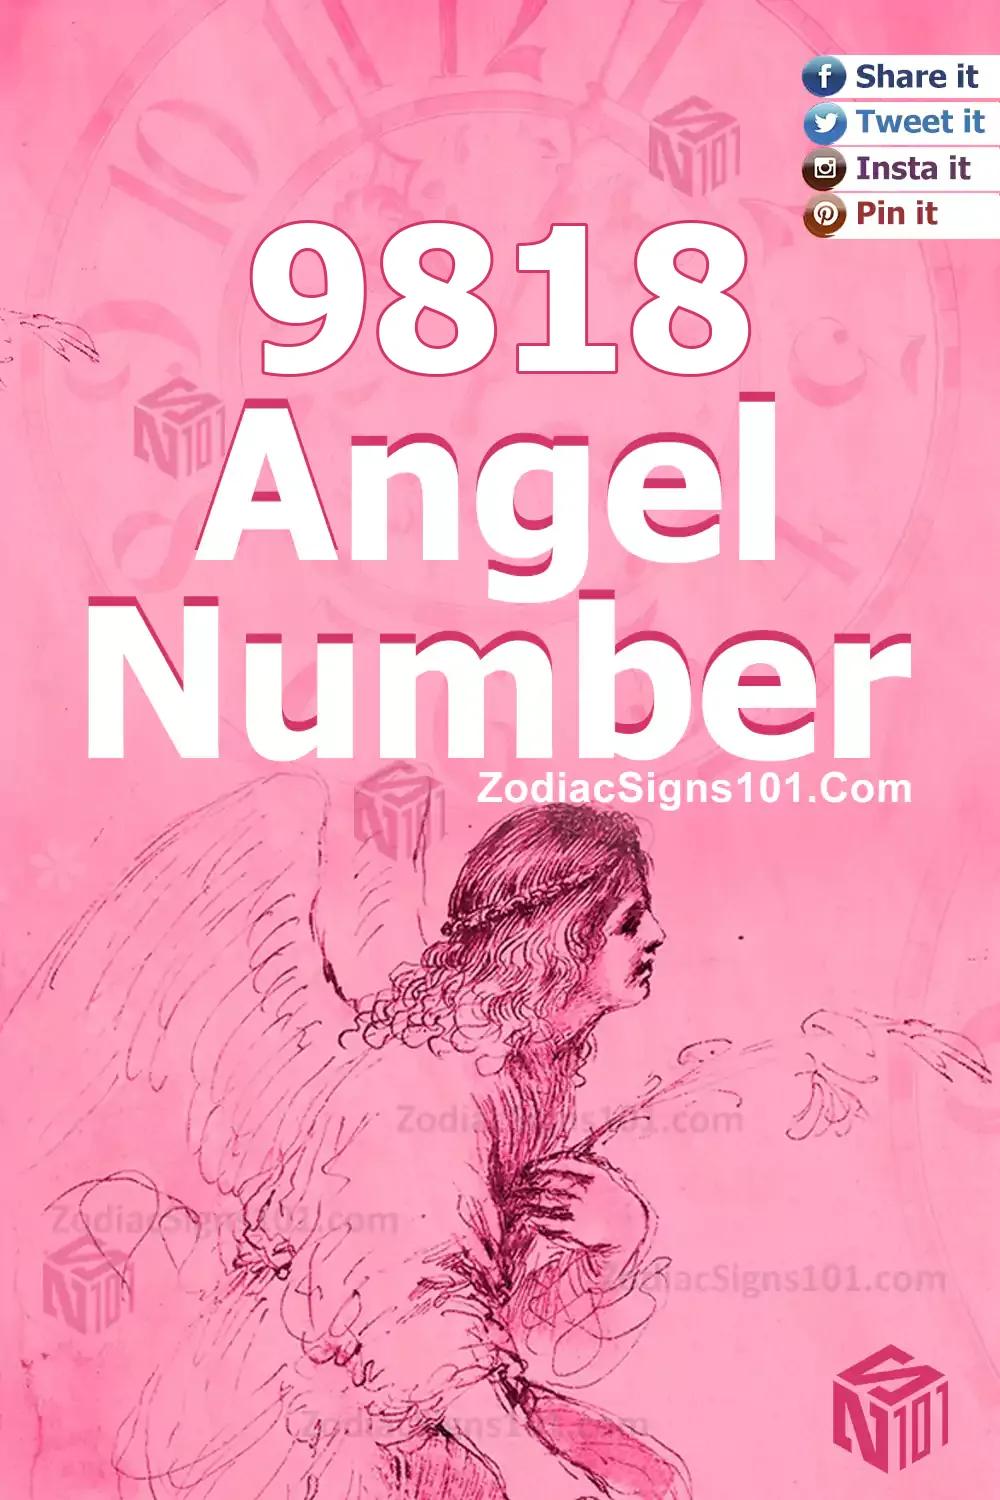 9818 Angel Number Meaning